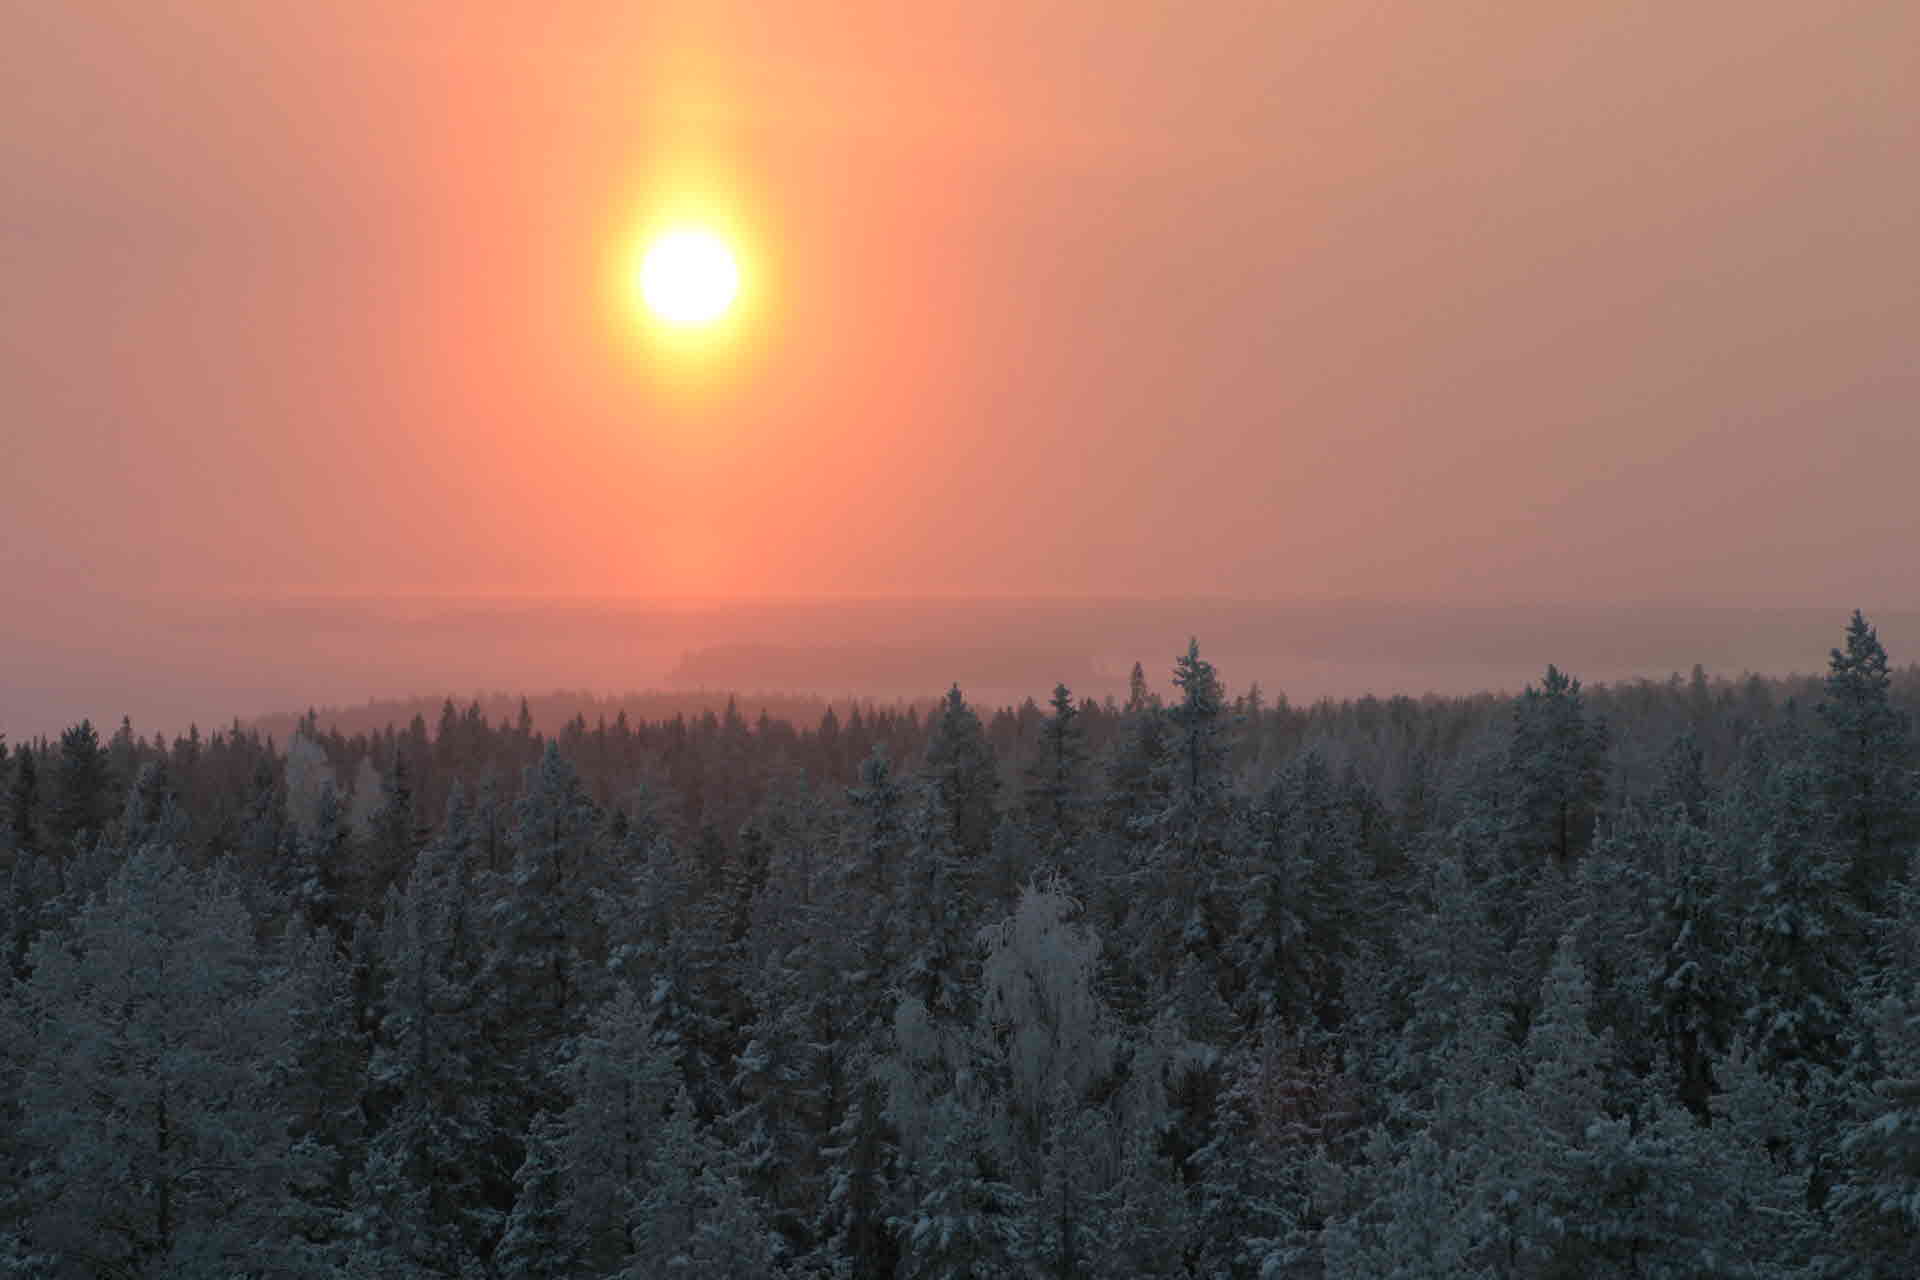 A sunset over a snow-covered forest